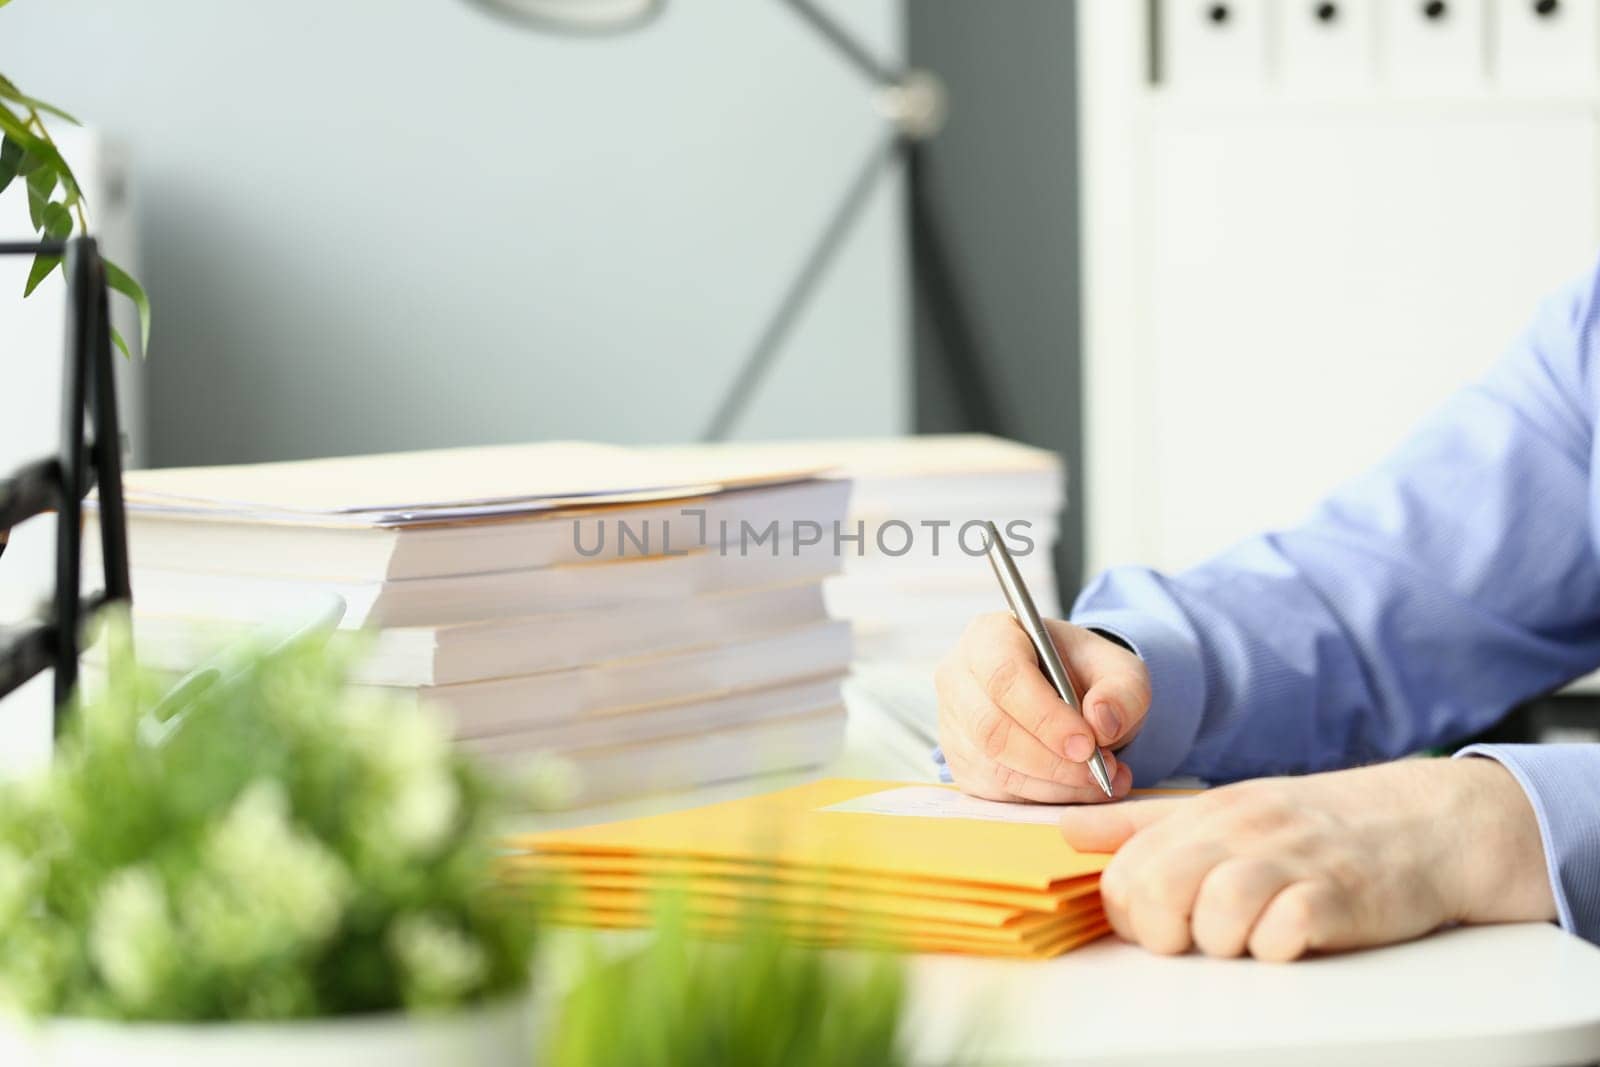 Clerk fills yellow envelopes with mail in office by kuprevich